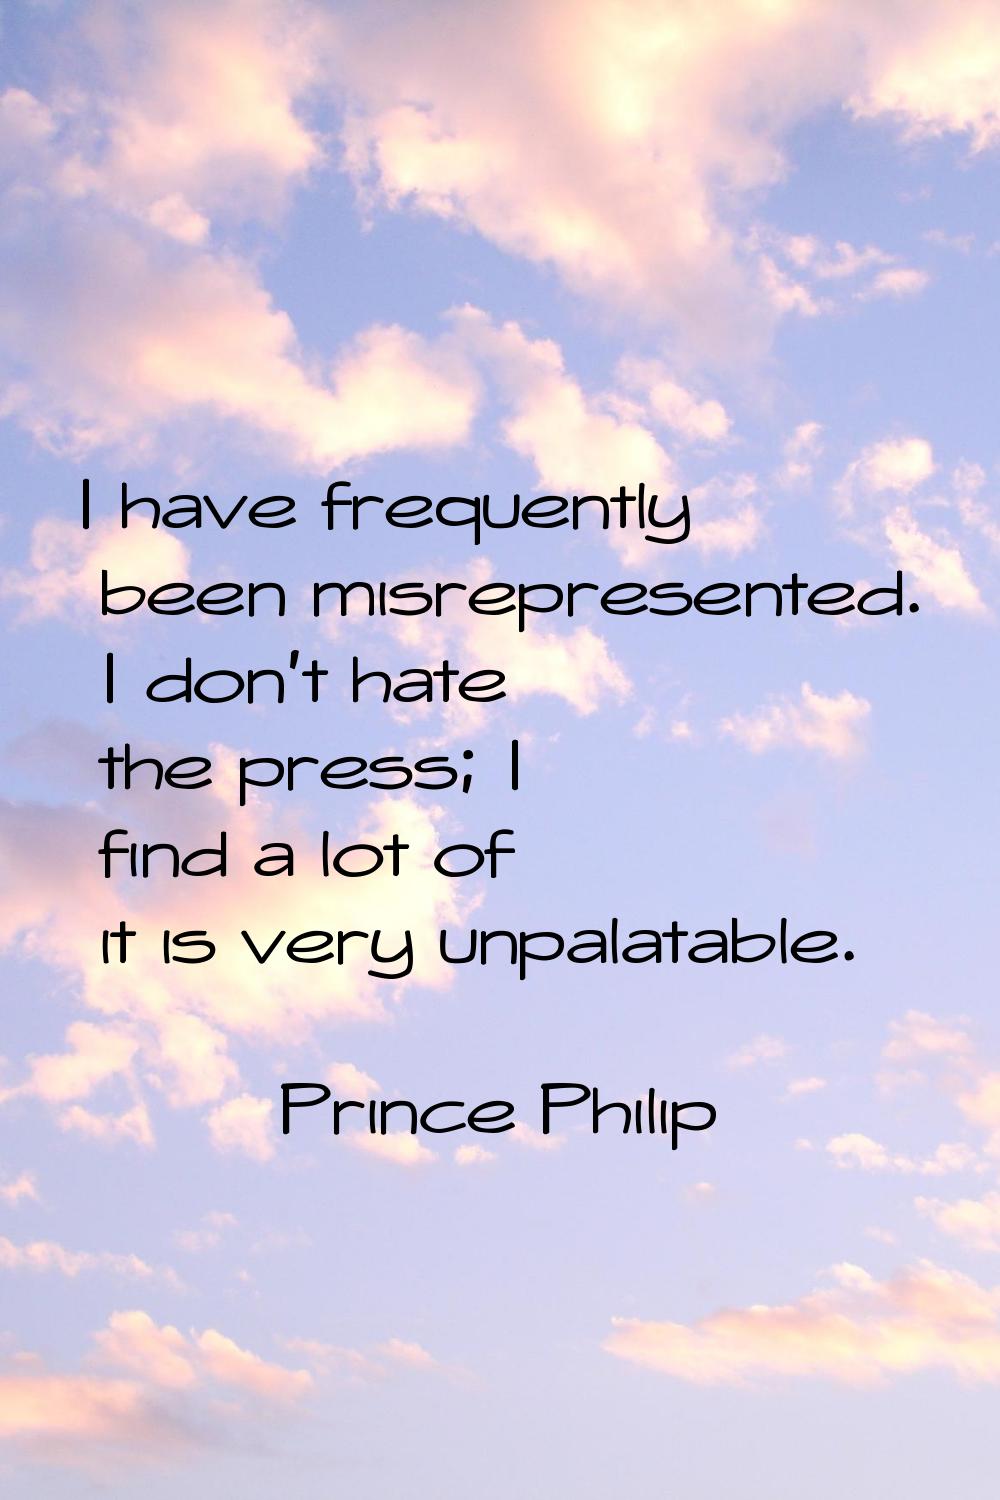 I have frequently been misrepresented. I don't hate the press; I find a lot of it is very unpalatab